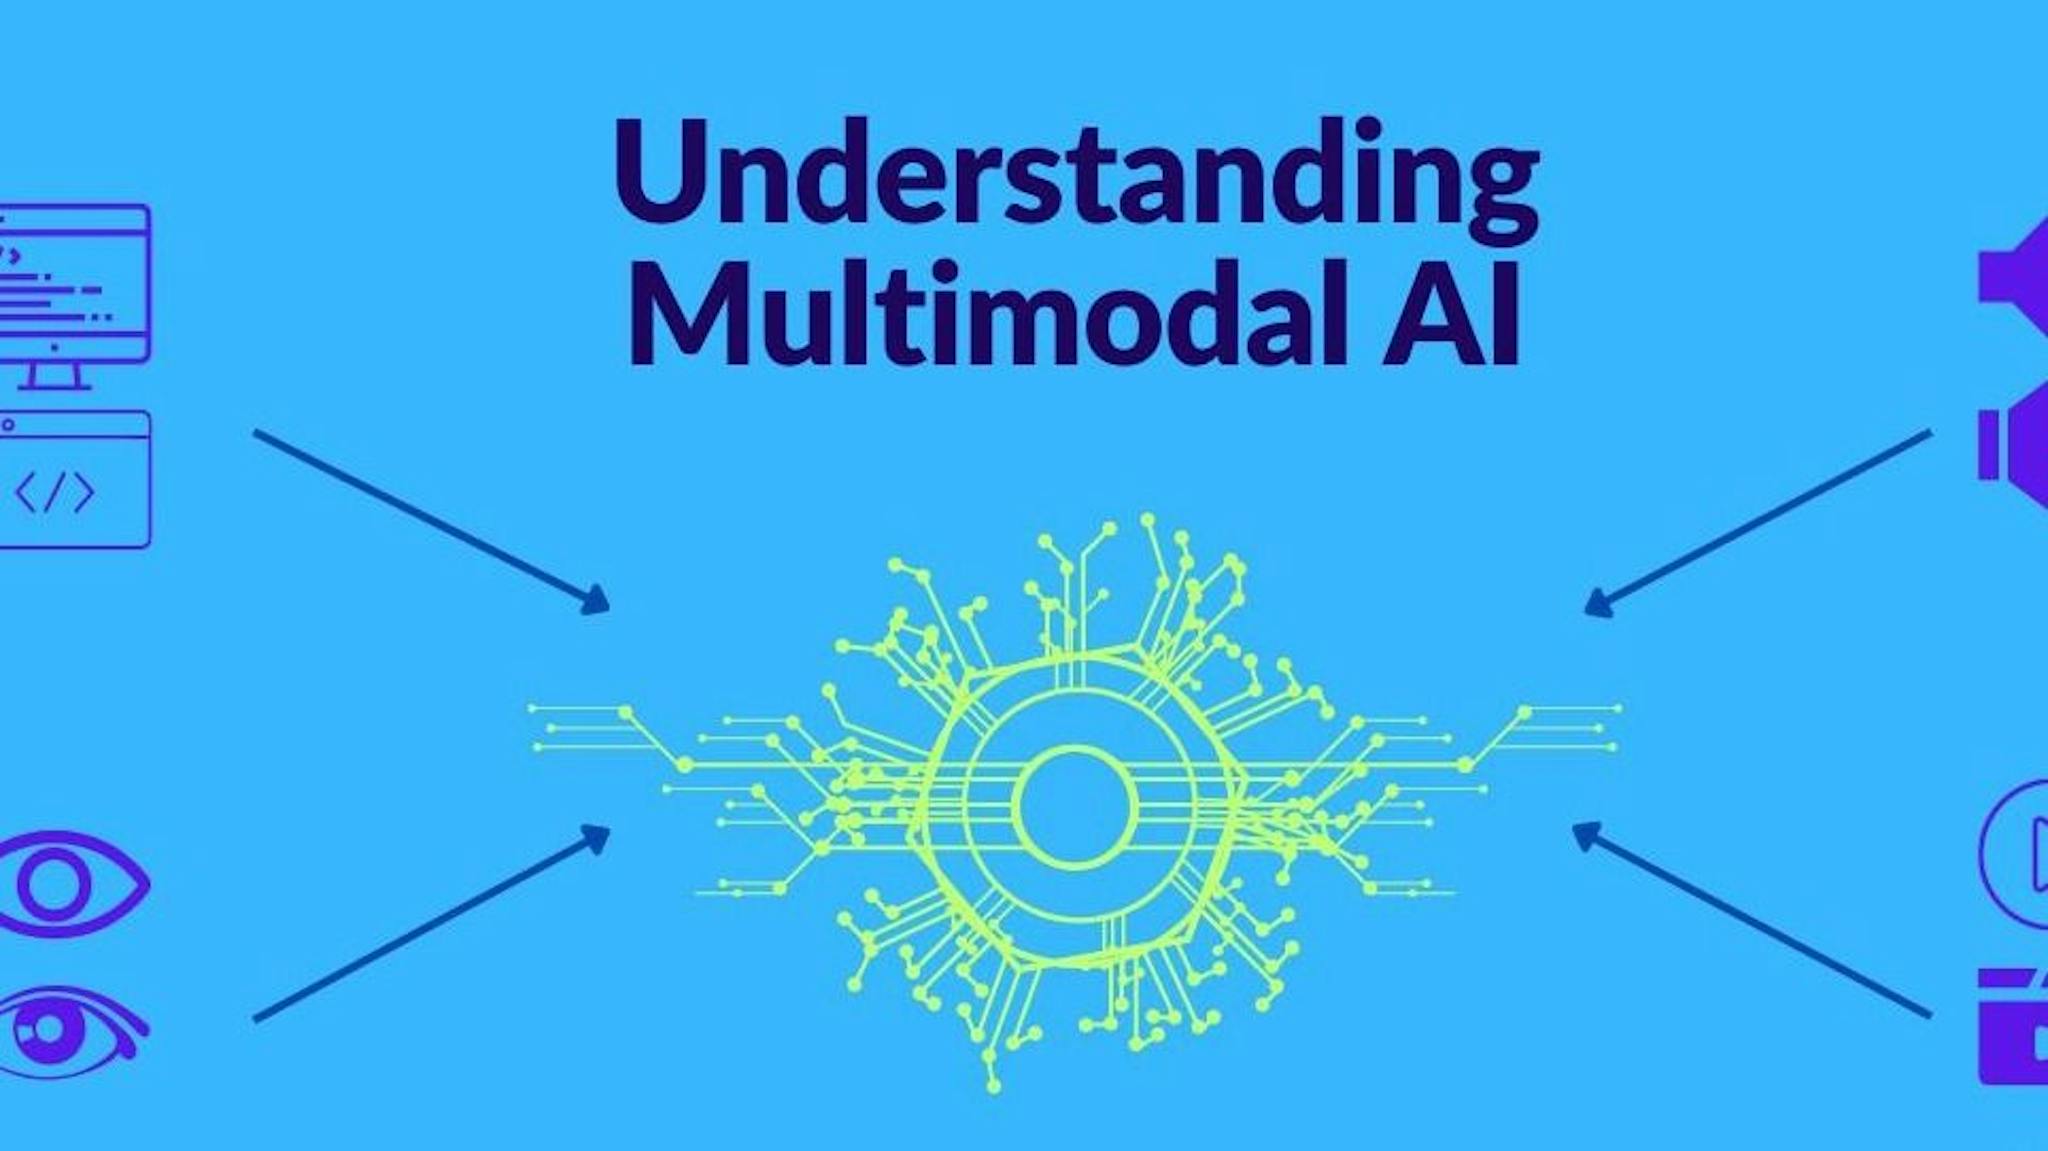 featured image - The Future of AI: Understanding Multimodal Systems